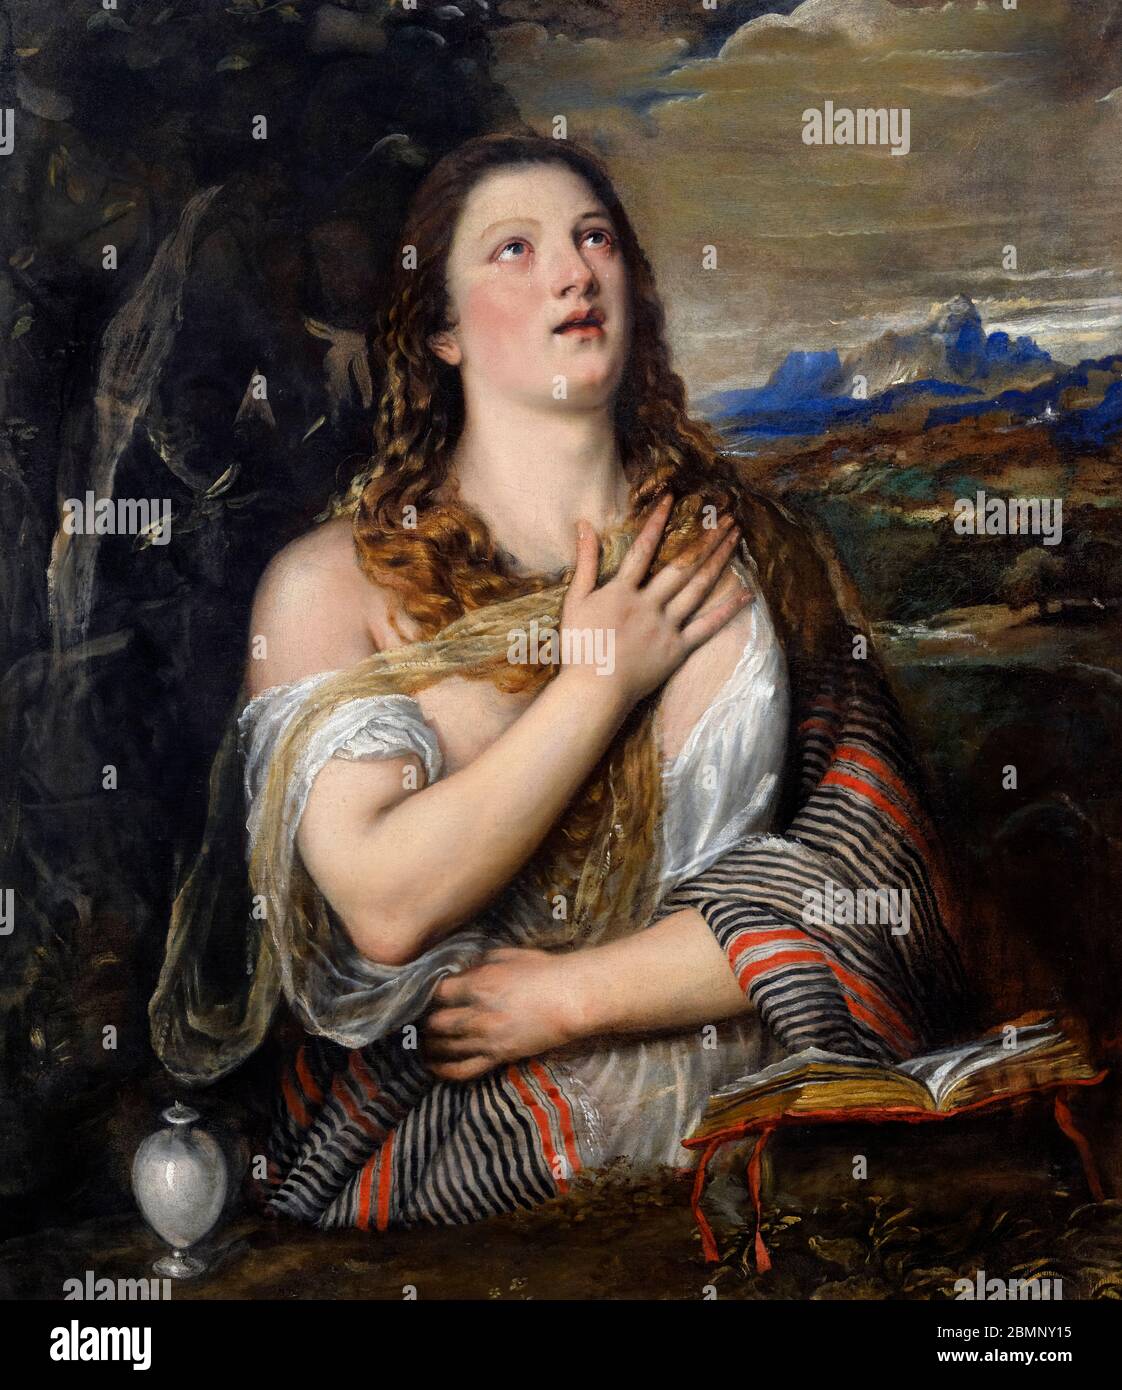 The Penitent Magdalen by Tiziano Vecellio (Titian - 1490-1576), oil on canvas, c.1555-65 Stock Photo